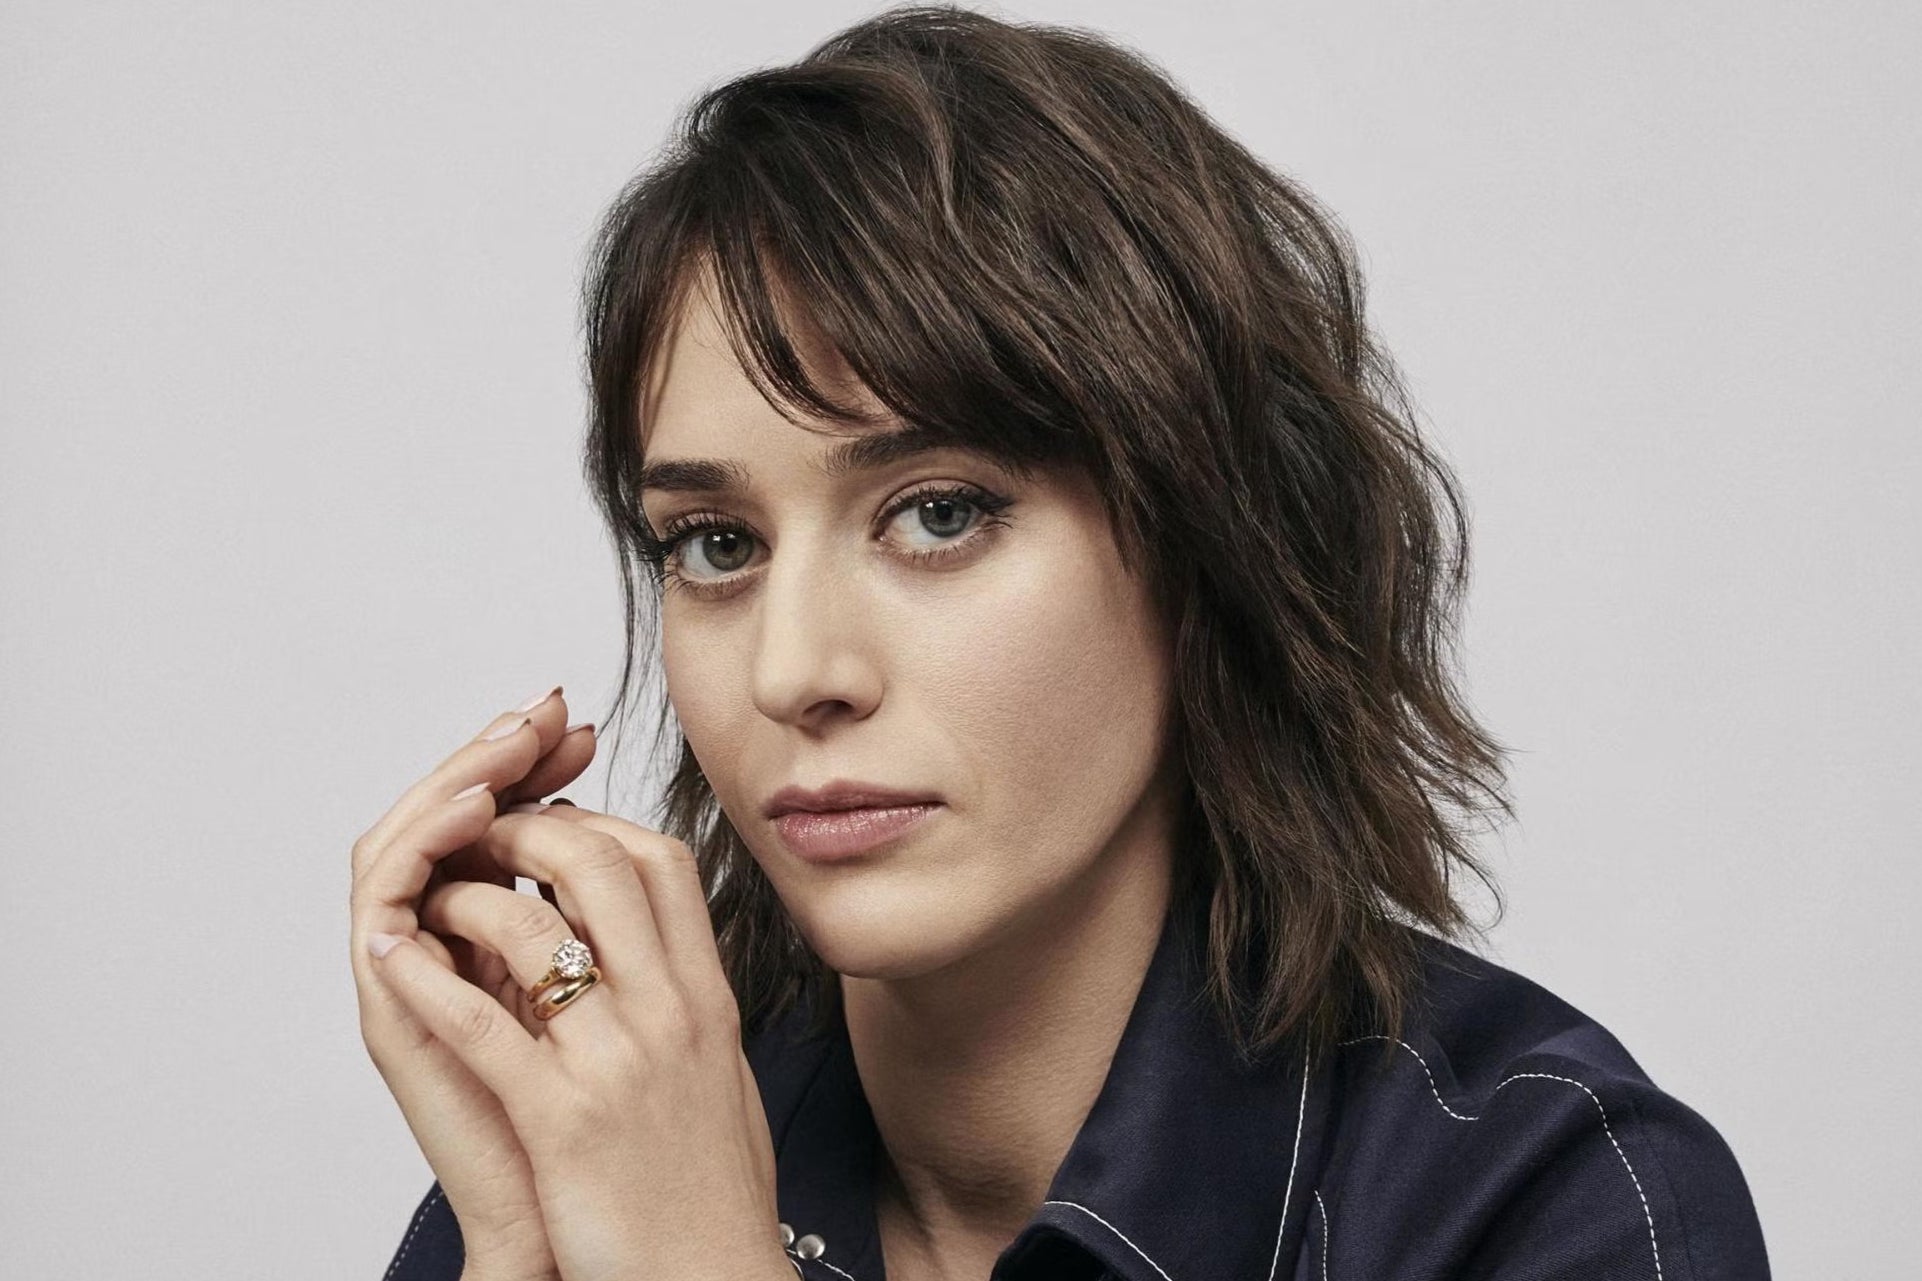 Lizzy Caplan After Mean Girls, I didnt work again until I dyed my hair blonde and got a spray tan The Independent The Independent pic